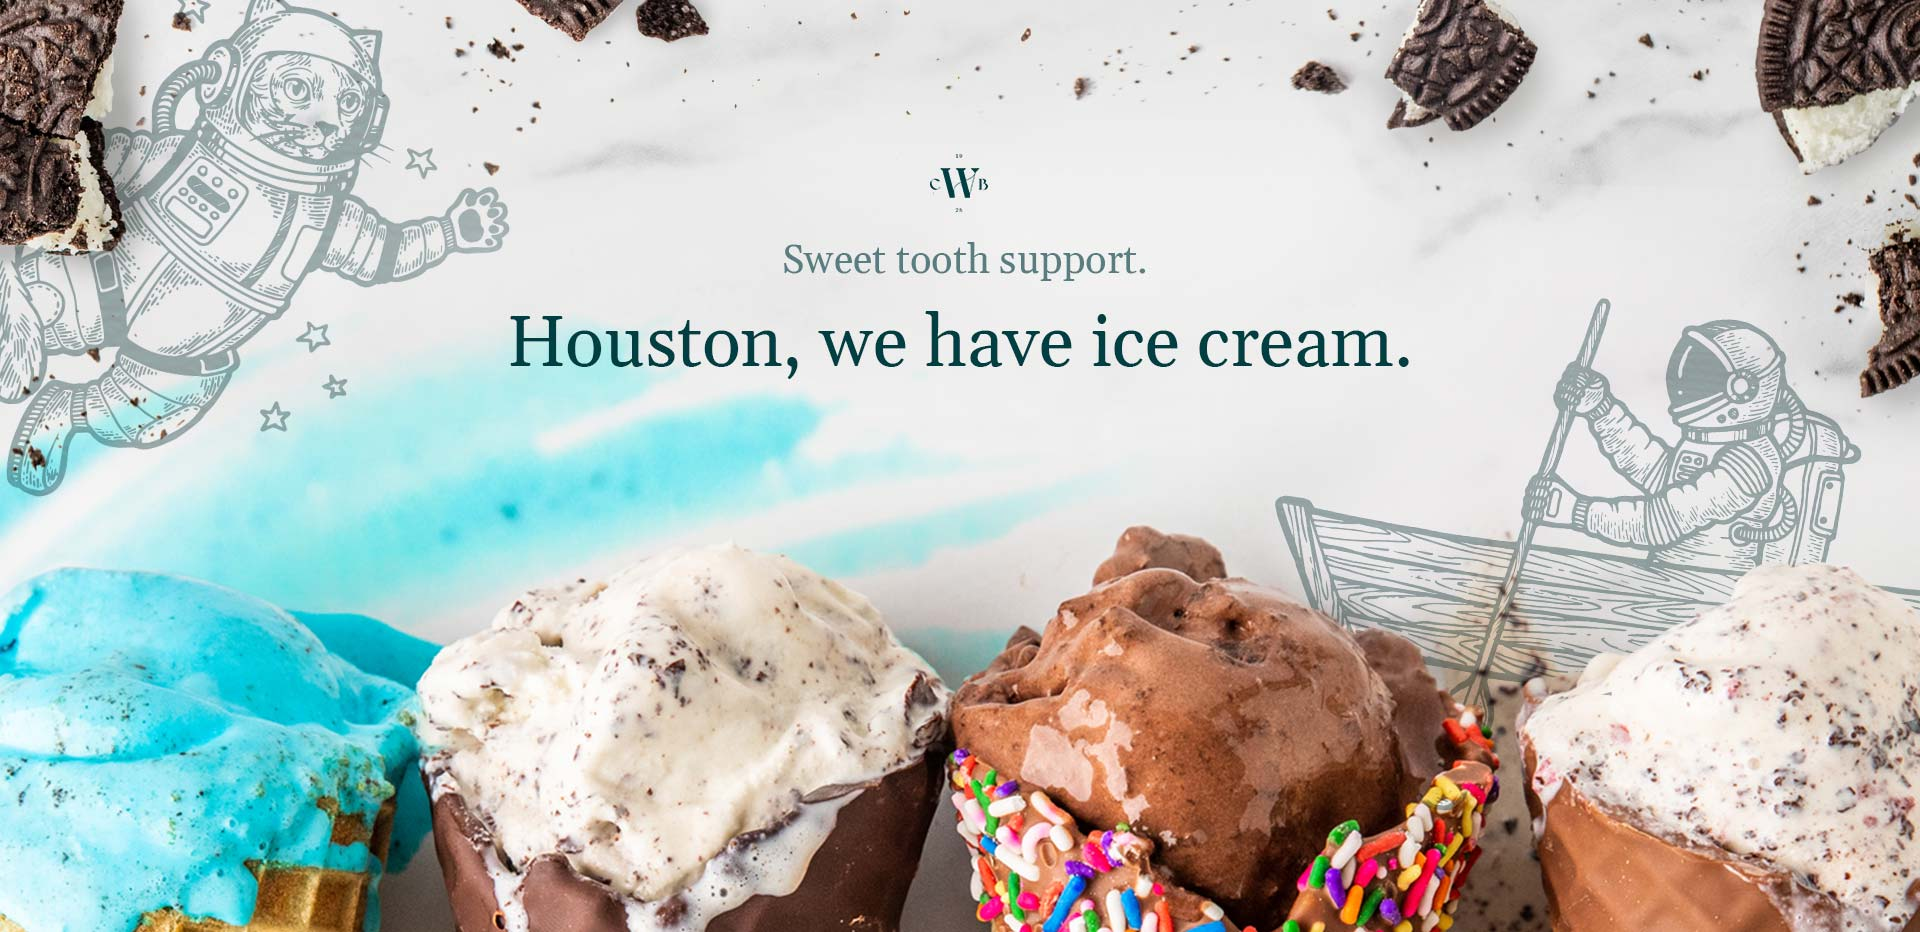 Sweet tooth support. Houston, we have ice cream.